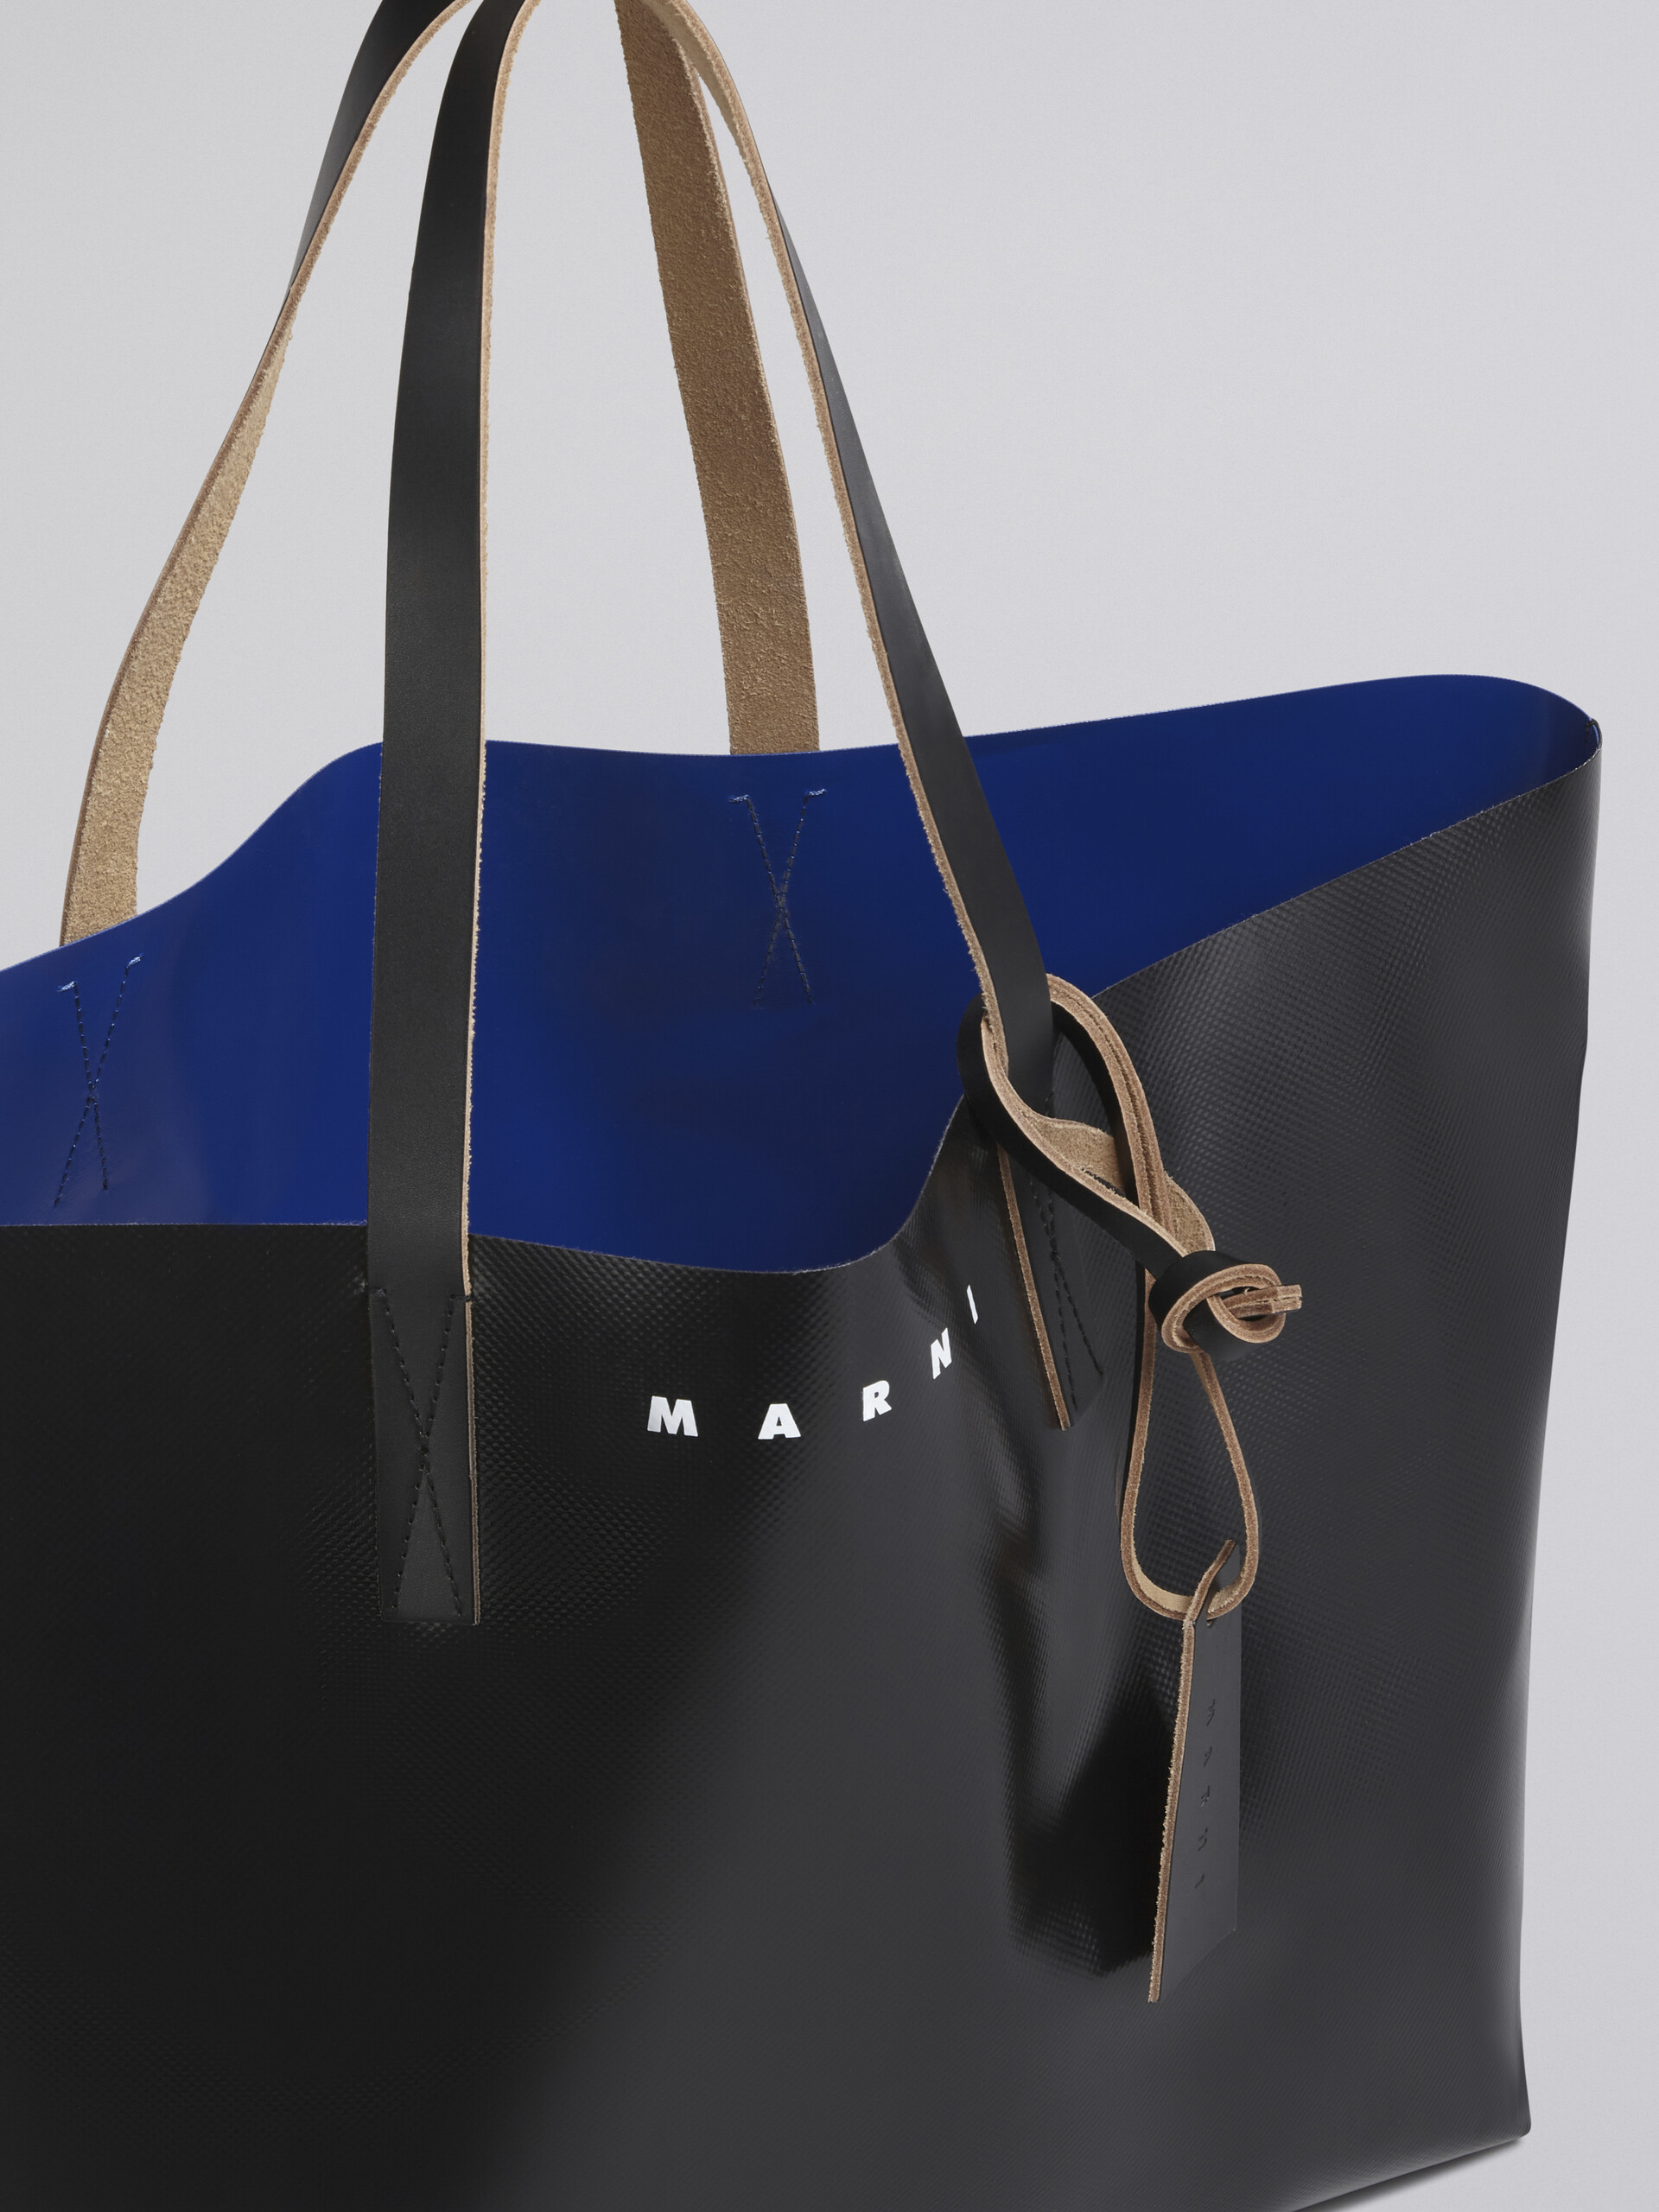 Black and blue TRIBECA shopping bag - Shopping Bags - Image 3